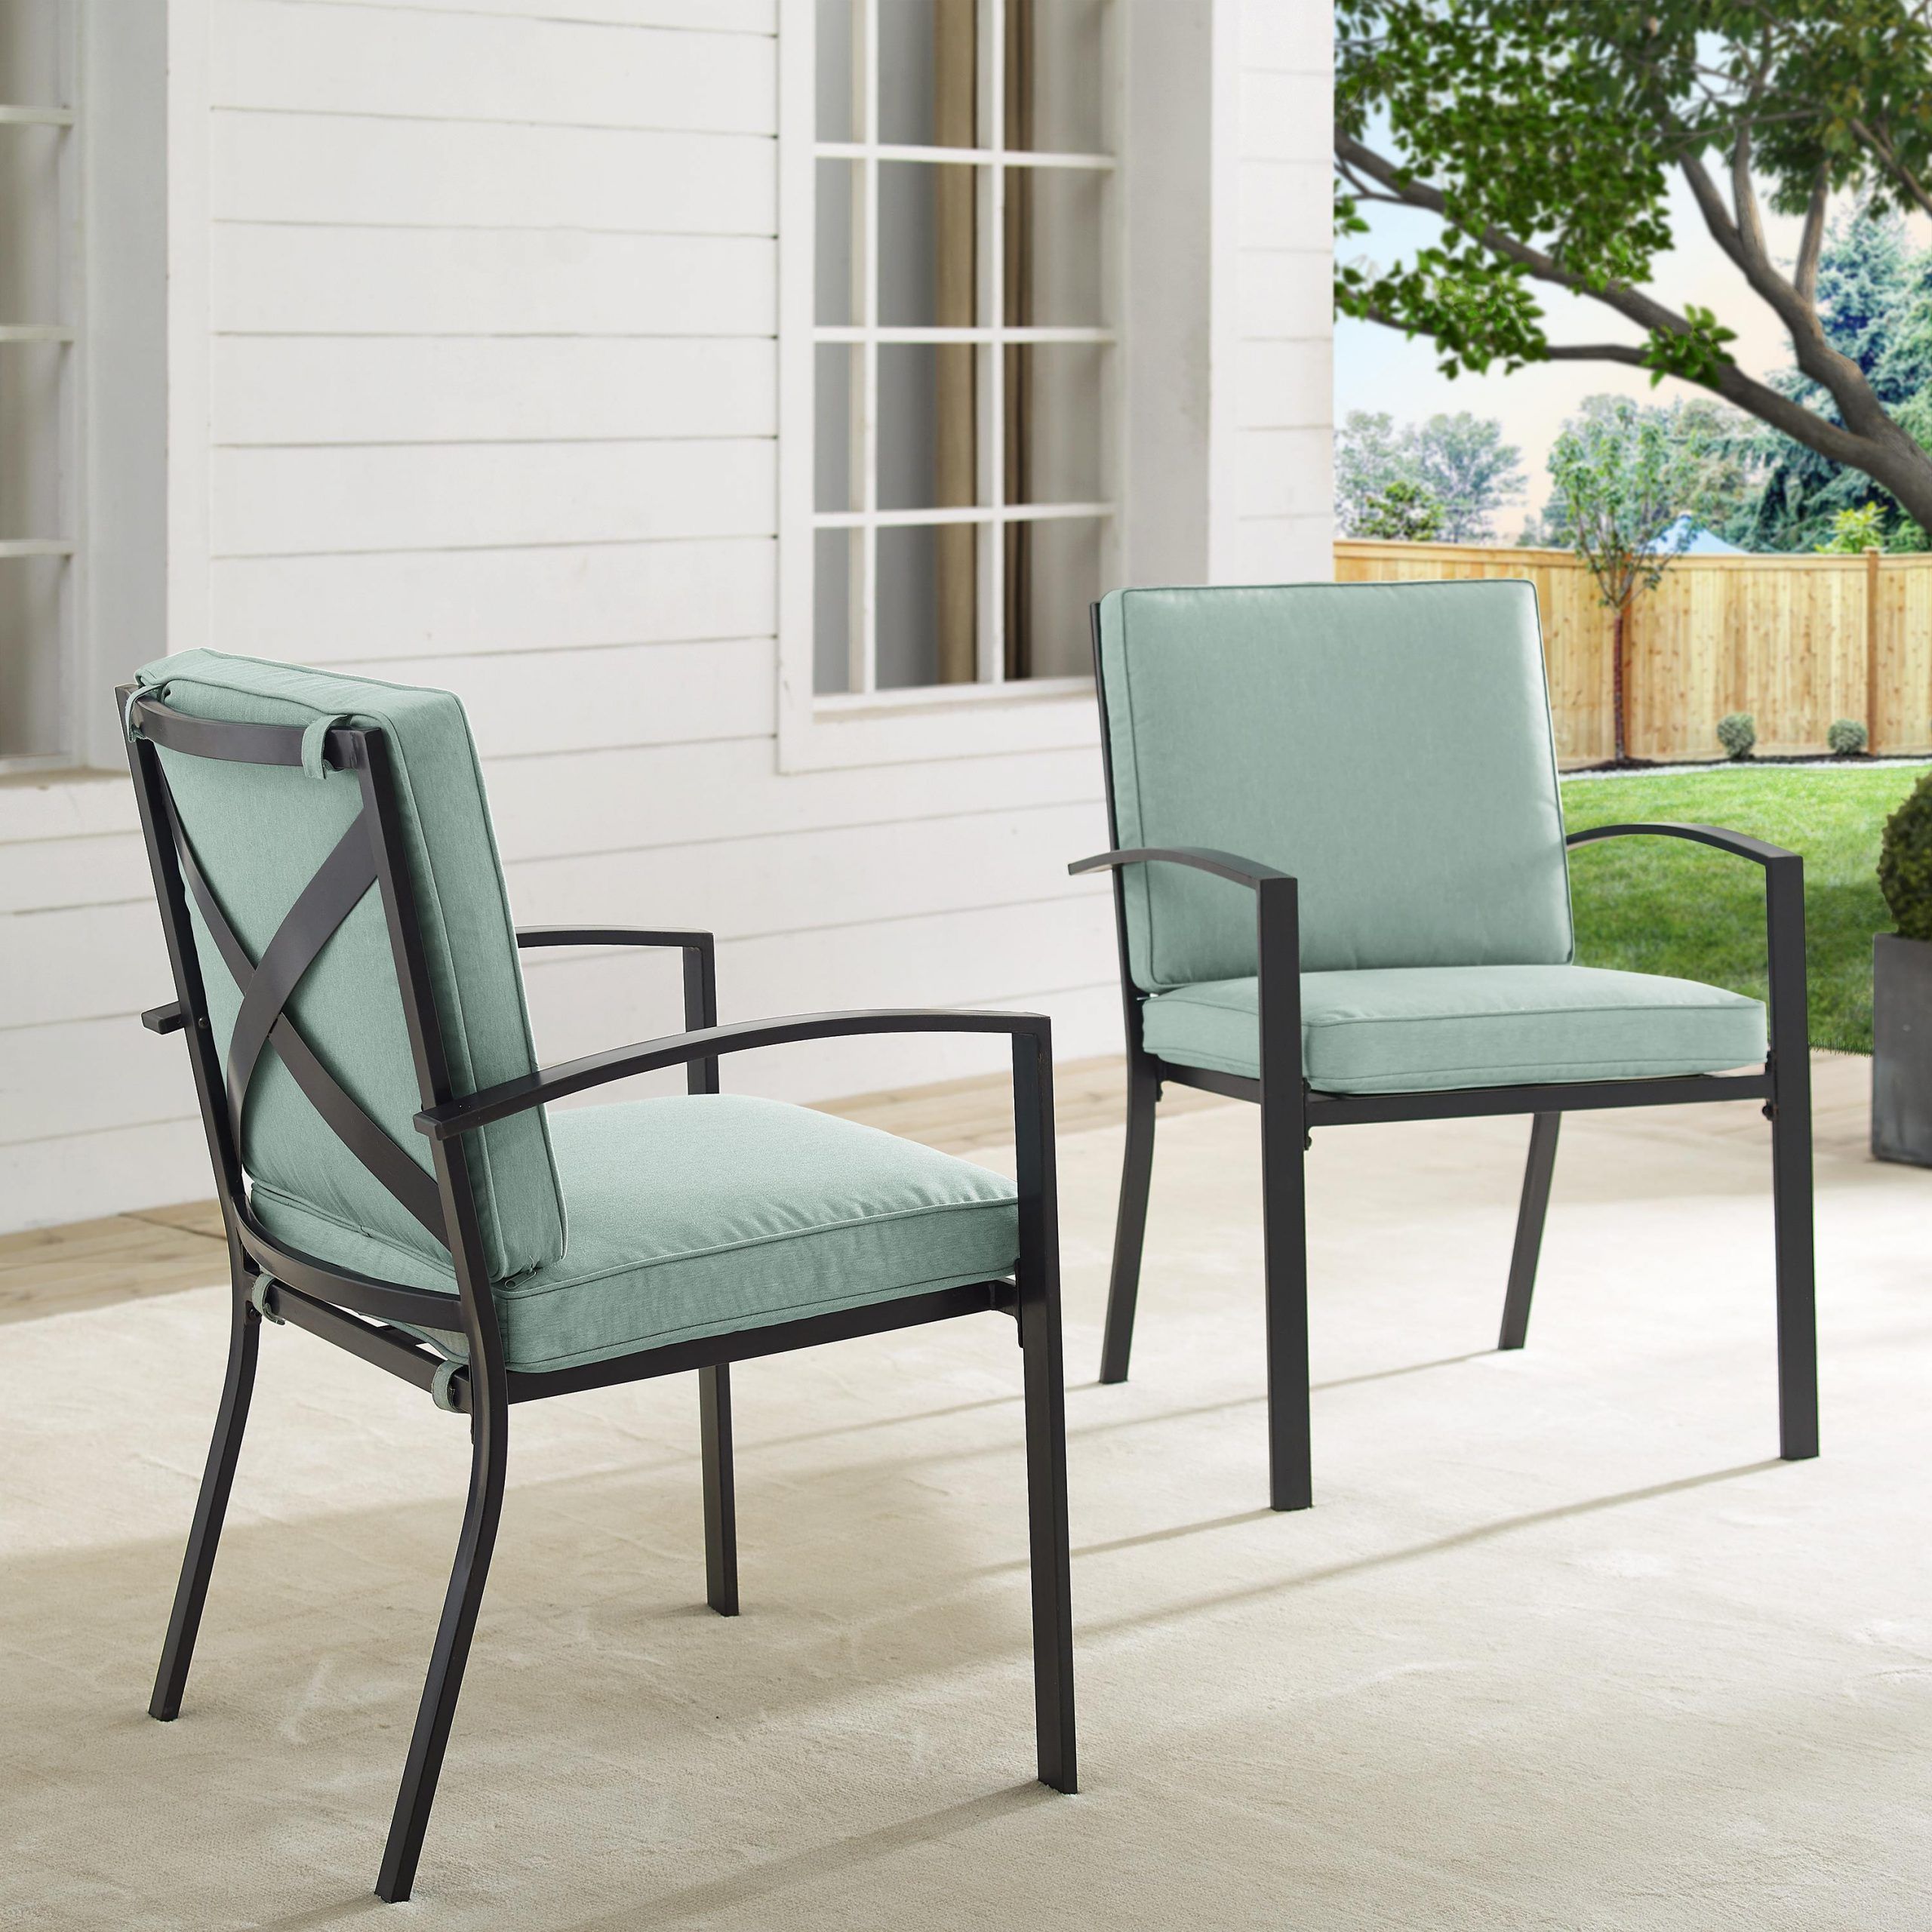 Crosley Kaplan 2pc Outdoor Dining Chair Set Mist/oil Rubbed Bronze – 2 Throughout Most Current Mist Fabric Outdoor Patio Sets (View 1 of 15)